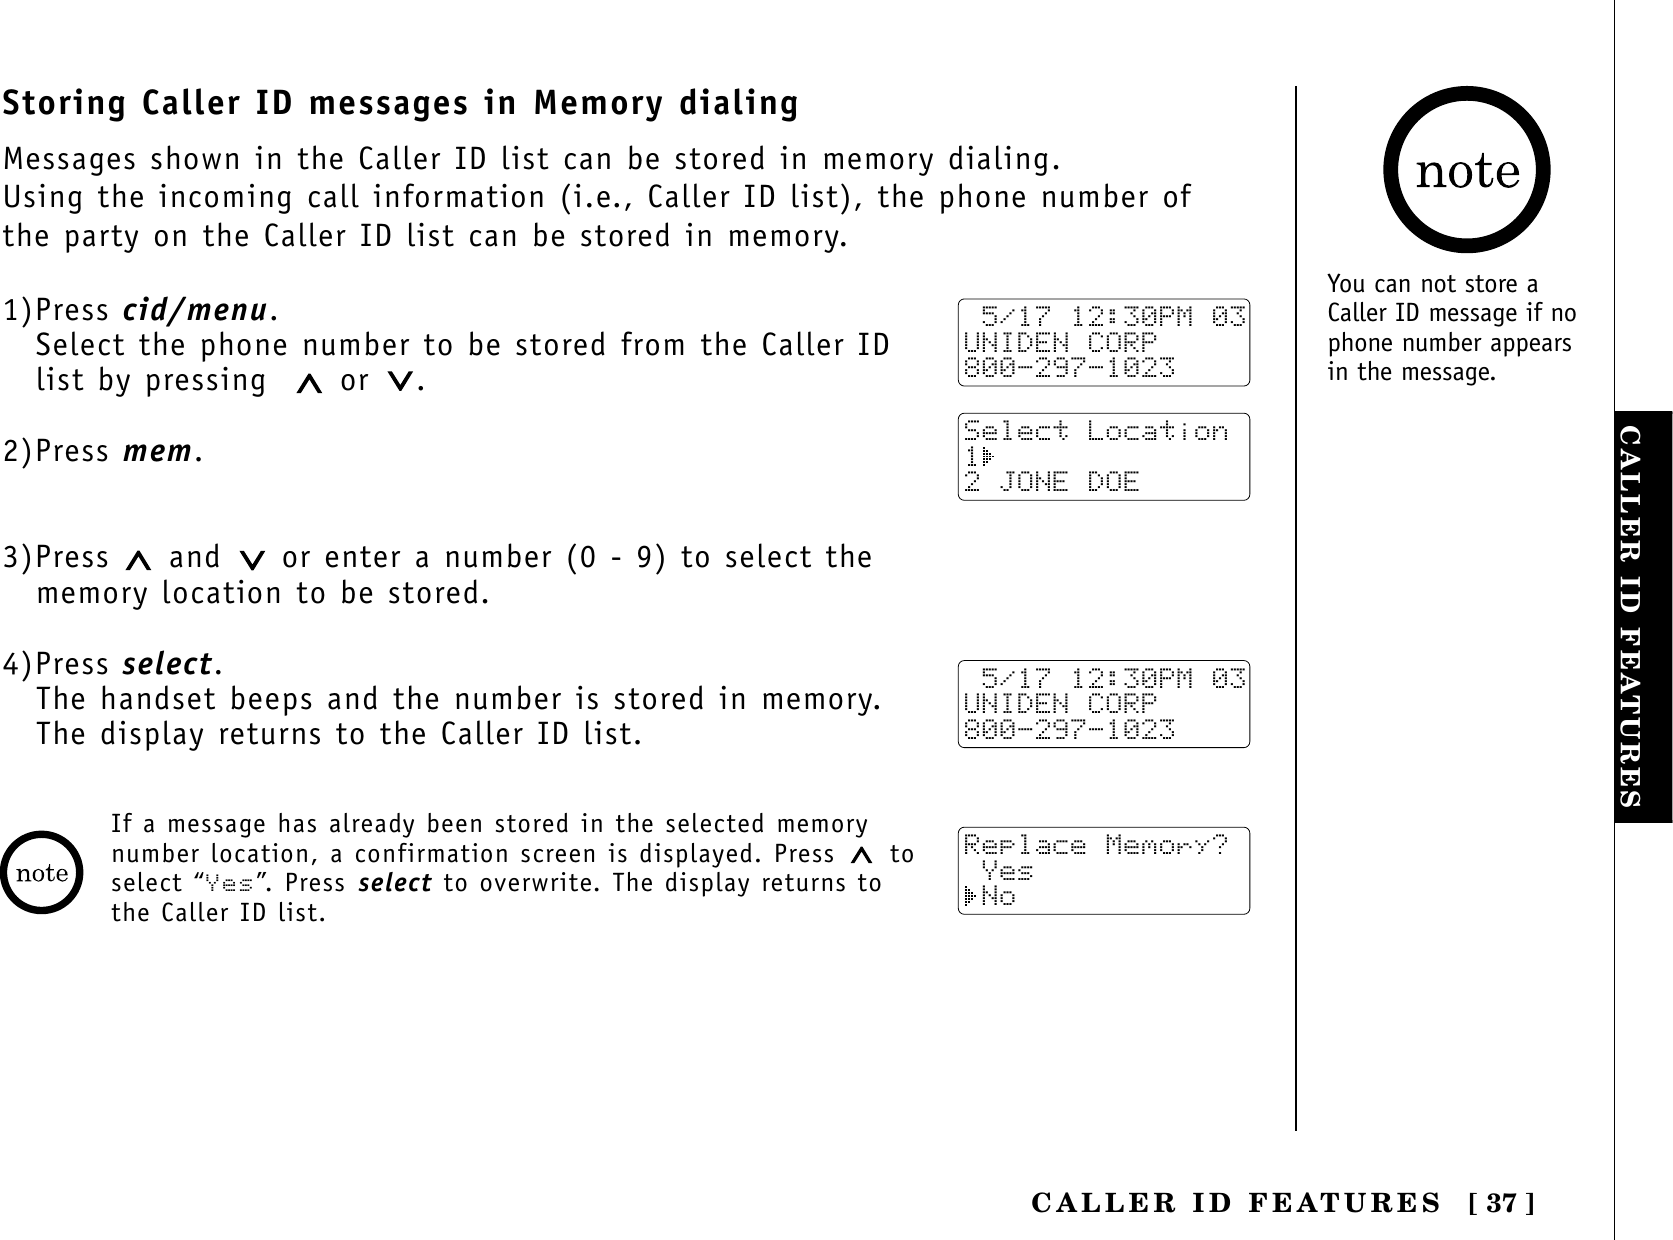 [ 37 ]CALLER ID FEATURESCALLER ID FEATURESStoring Caller ID messages in Memory dialingMessages shown in the Caller ID list can be stored in memory dialing.Using the incoming call information (i.e., Caller ID list), the phone number ofthe party on the Caller ID list can be stored in memory.1)Press cid/menu.Select the phone number to be stored from the Caller IDlist by pressing or .2)Press mem.3)Press  and or enter a number (0 - 9) to select the memory location to be stored.4)Press select.The handset beeps and the number is stored in memory. The display returns to the Caller ID list. 5/17 12:30PM 03UNIDEN CORP800-297-1023Select Location1 2 JONE DOE 5/17 12:30PM 03UNIDEN CORP800-297-1023Replace Memory? Yes NoIf a message has already been stored in the selected memorynumber location, a confirmation screen is displayed. Press  toselect “Yes”. Press select to overwrite. The display returns tothe Caller ID list.You can not store aCaller ID message if nophone number appearsin the message.